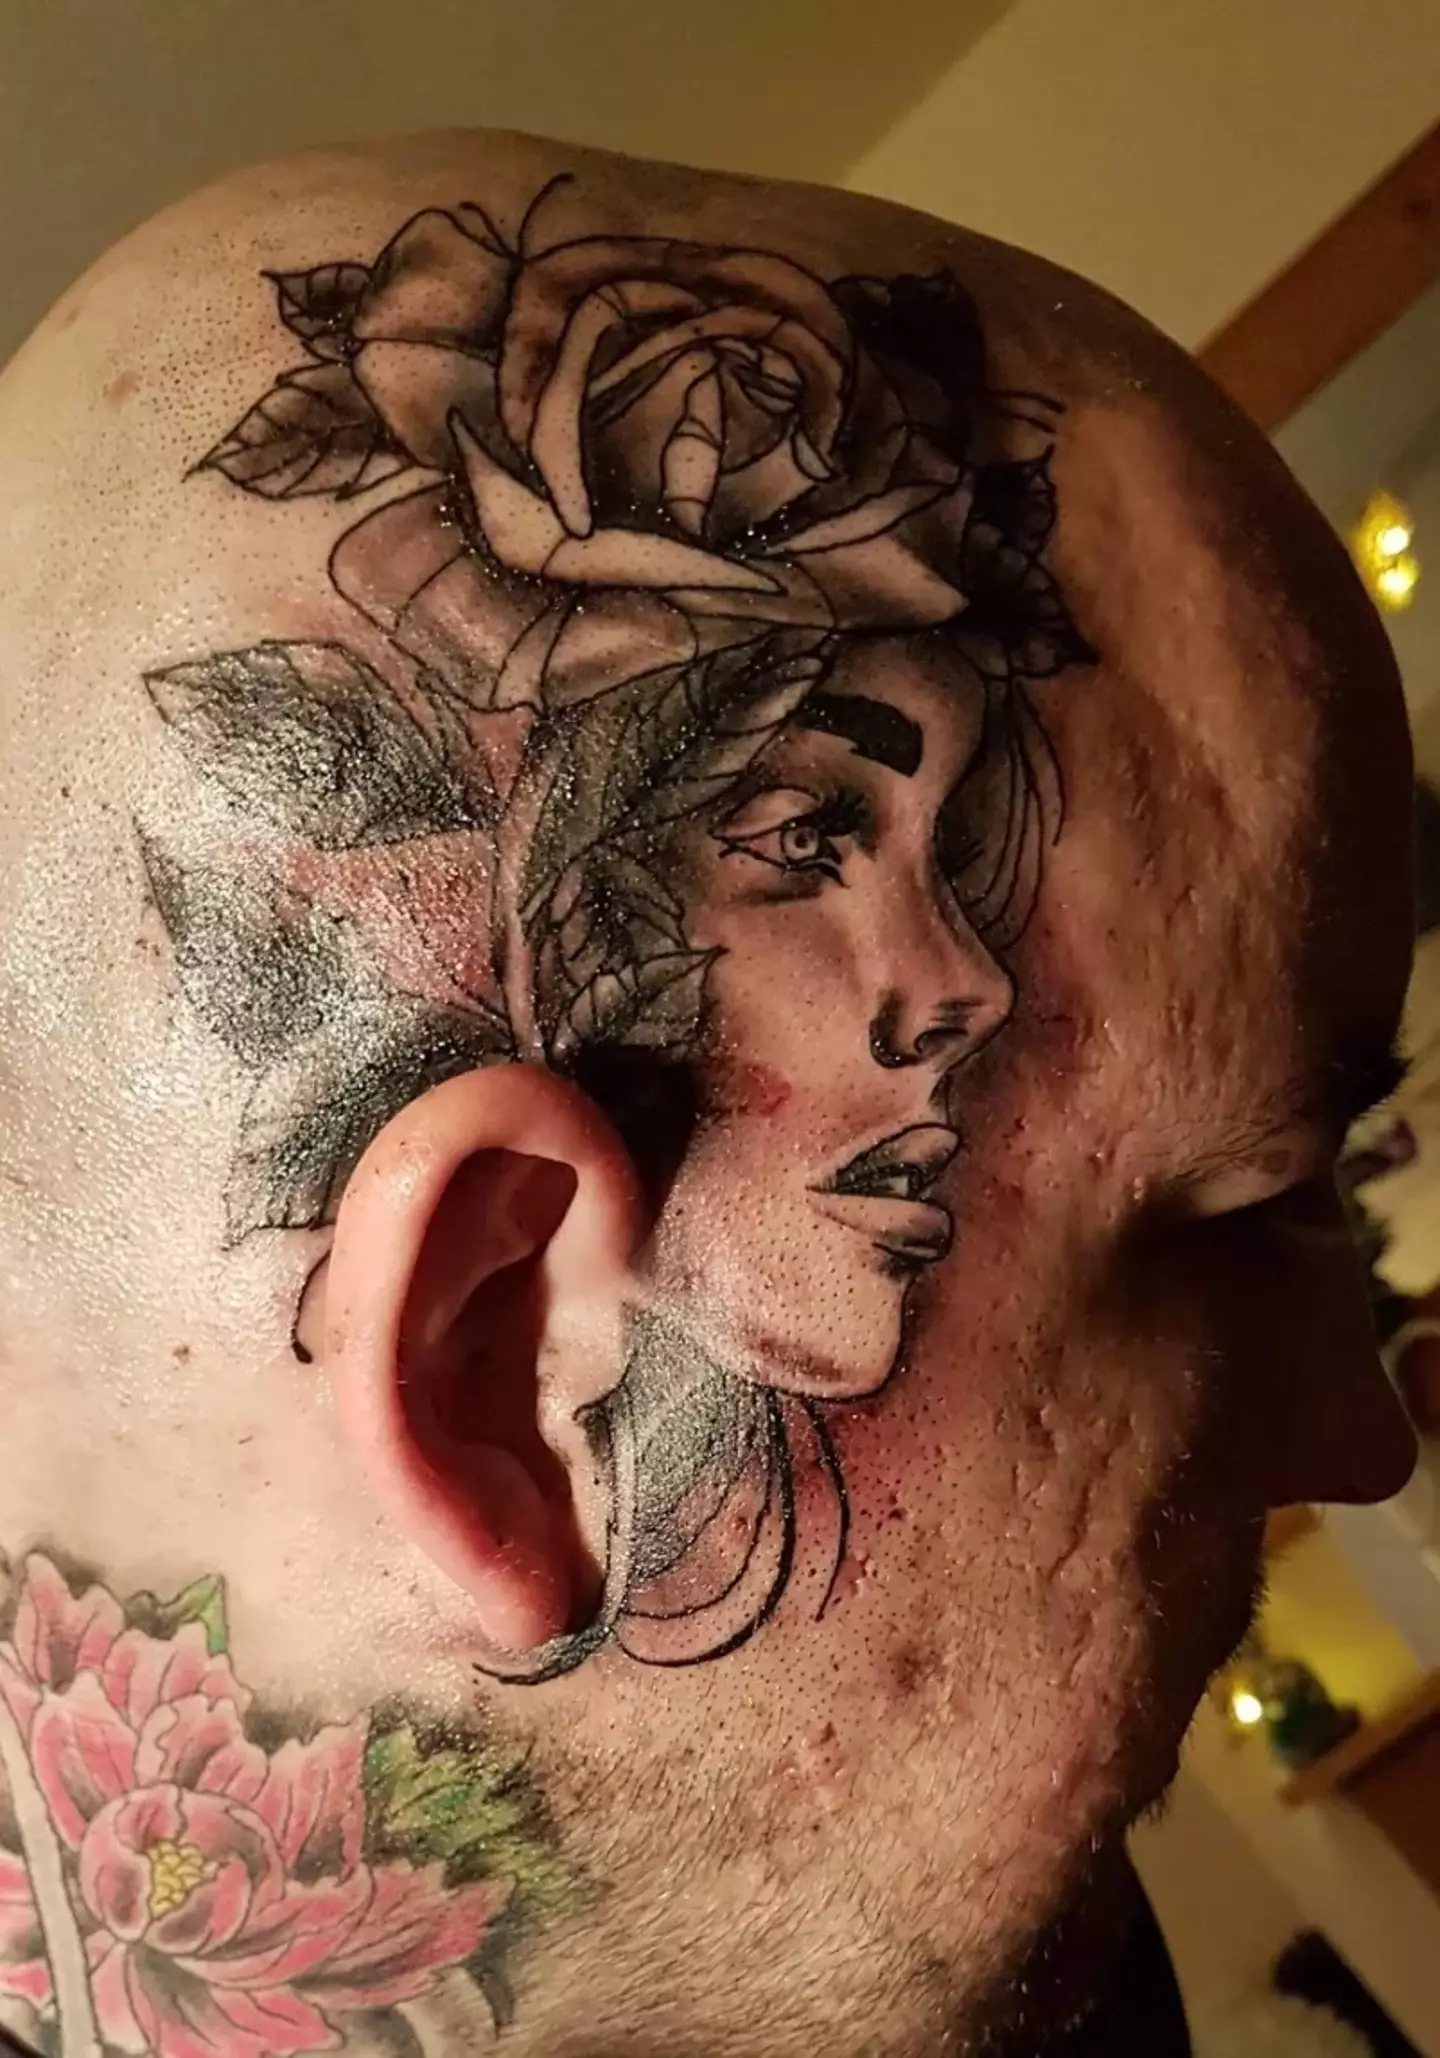 This wasn’t his first head-tattoo-rodeo - he already has a woman and mandala tattoo on his head.